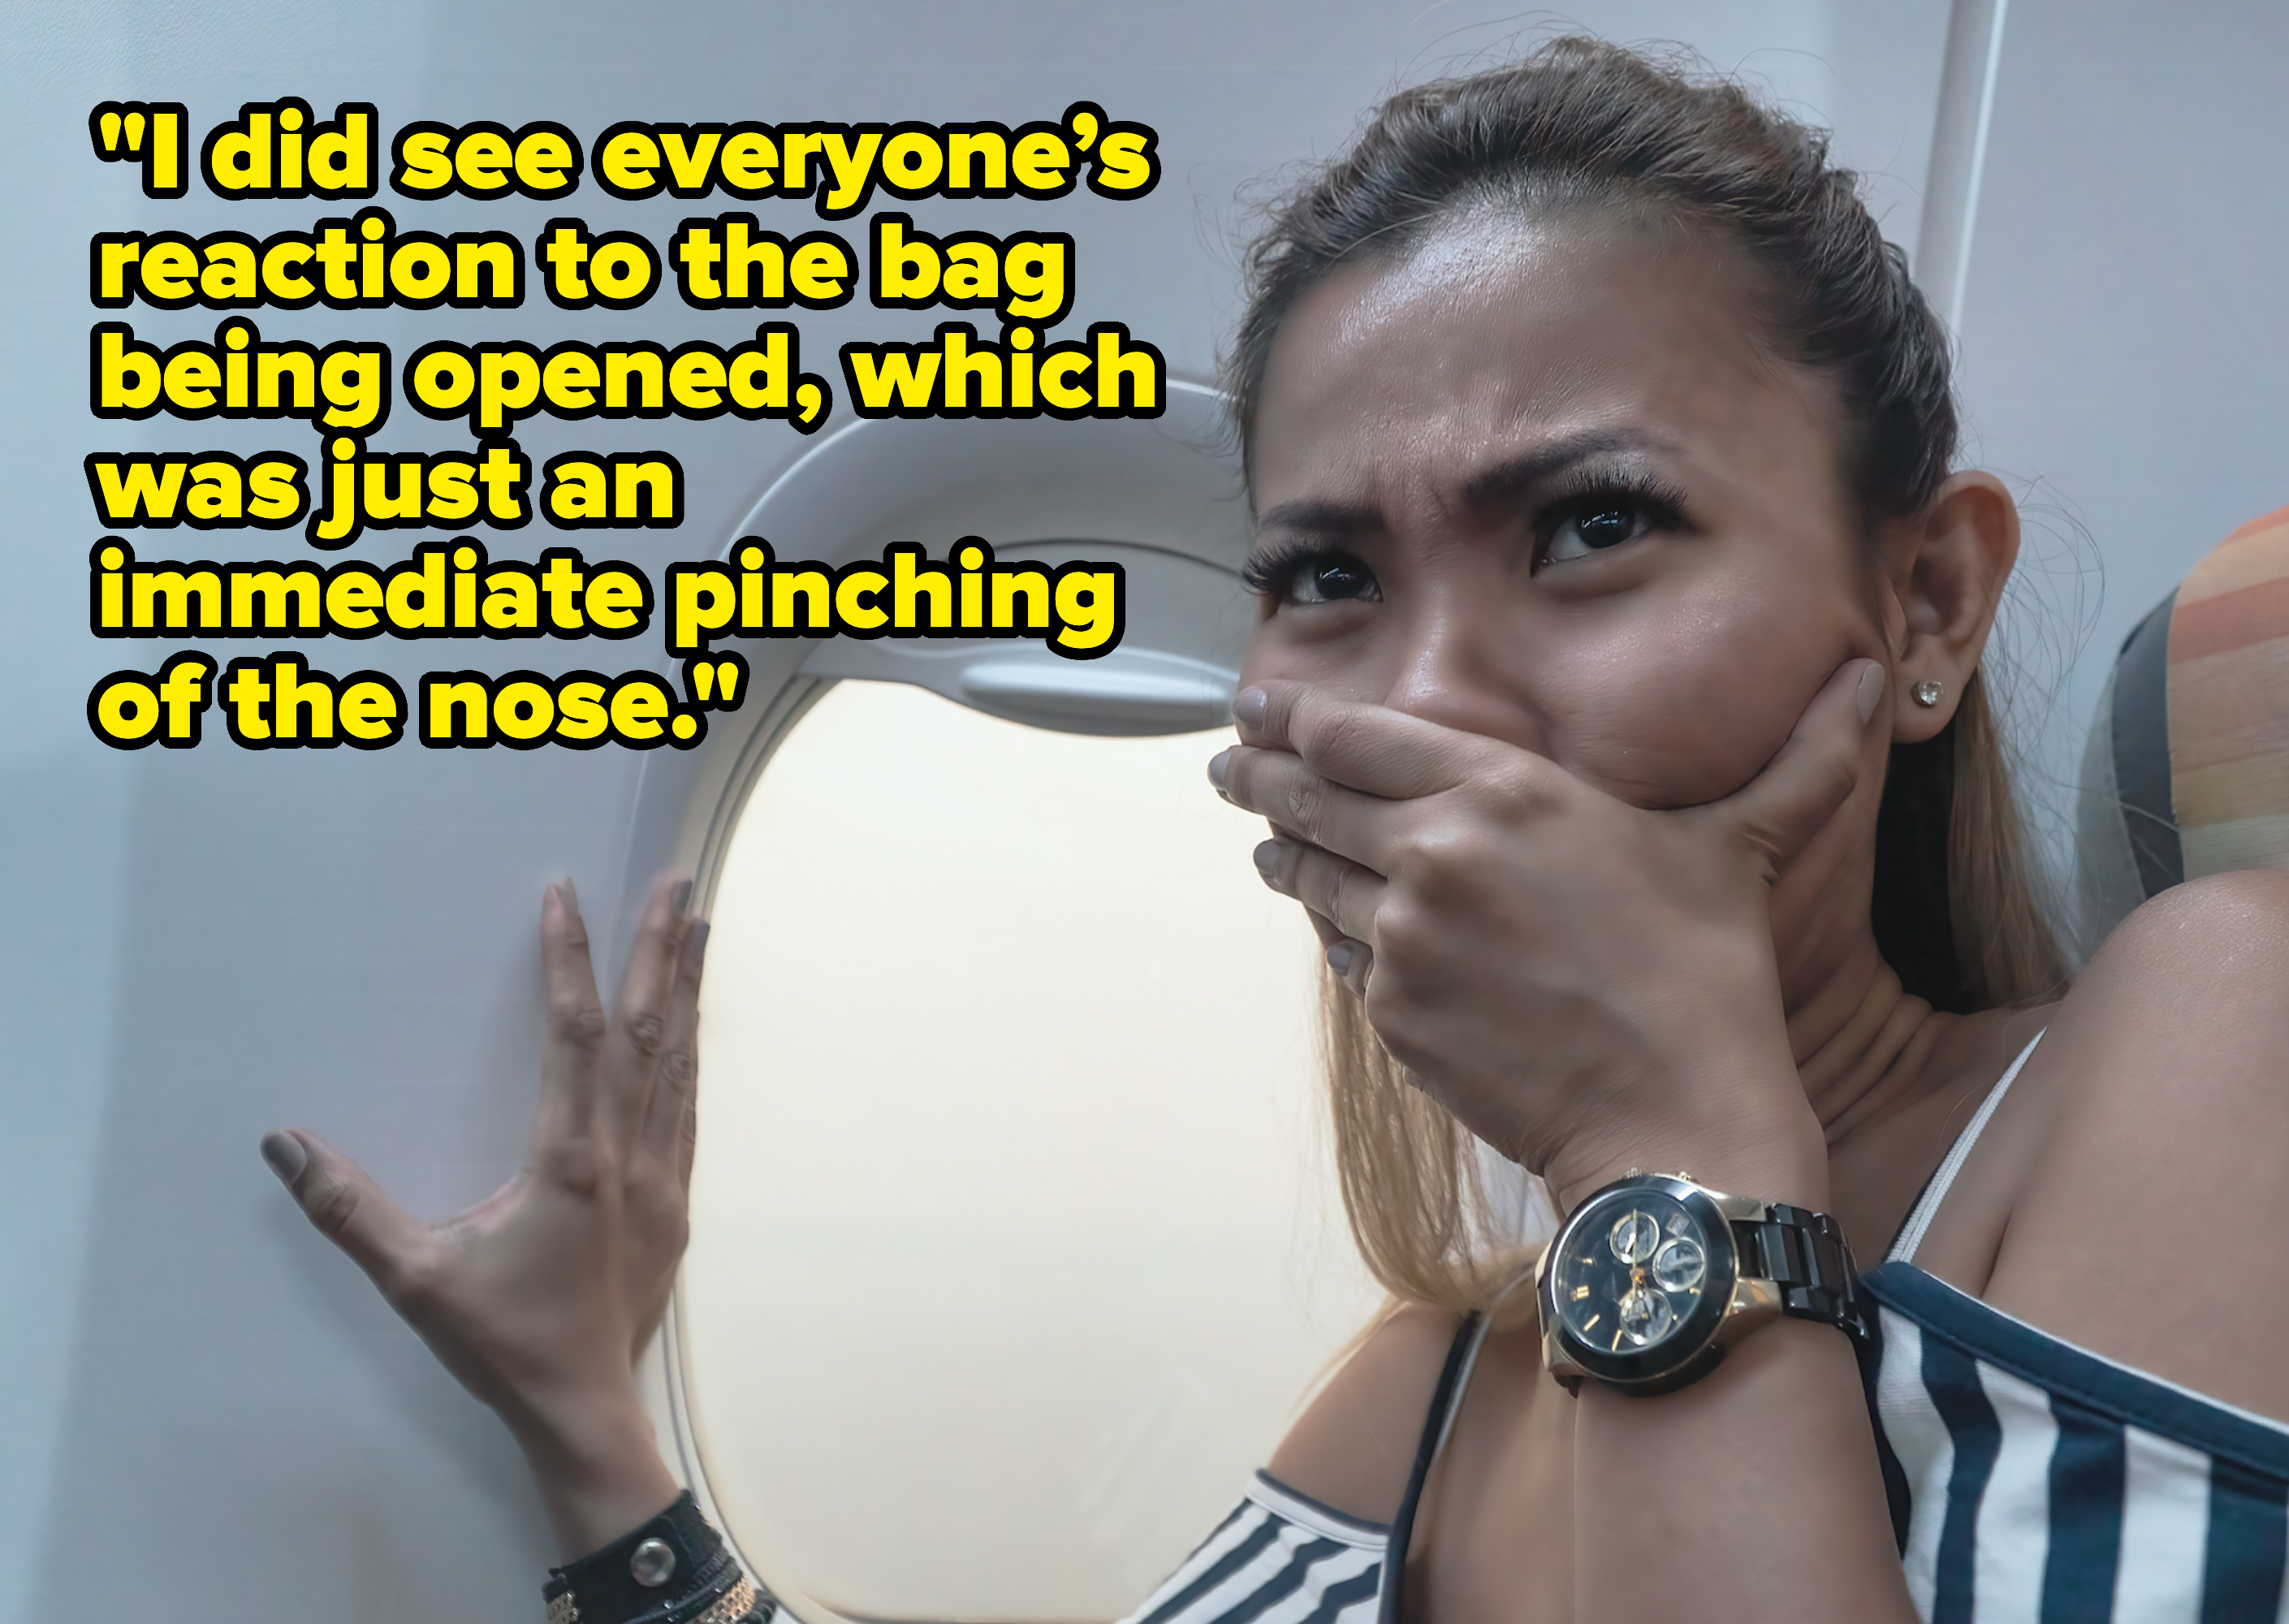 Woman appears panicked, covering her mouth and pressing hand against airplane window